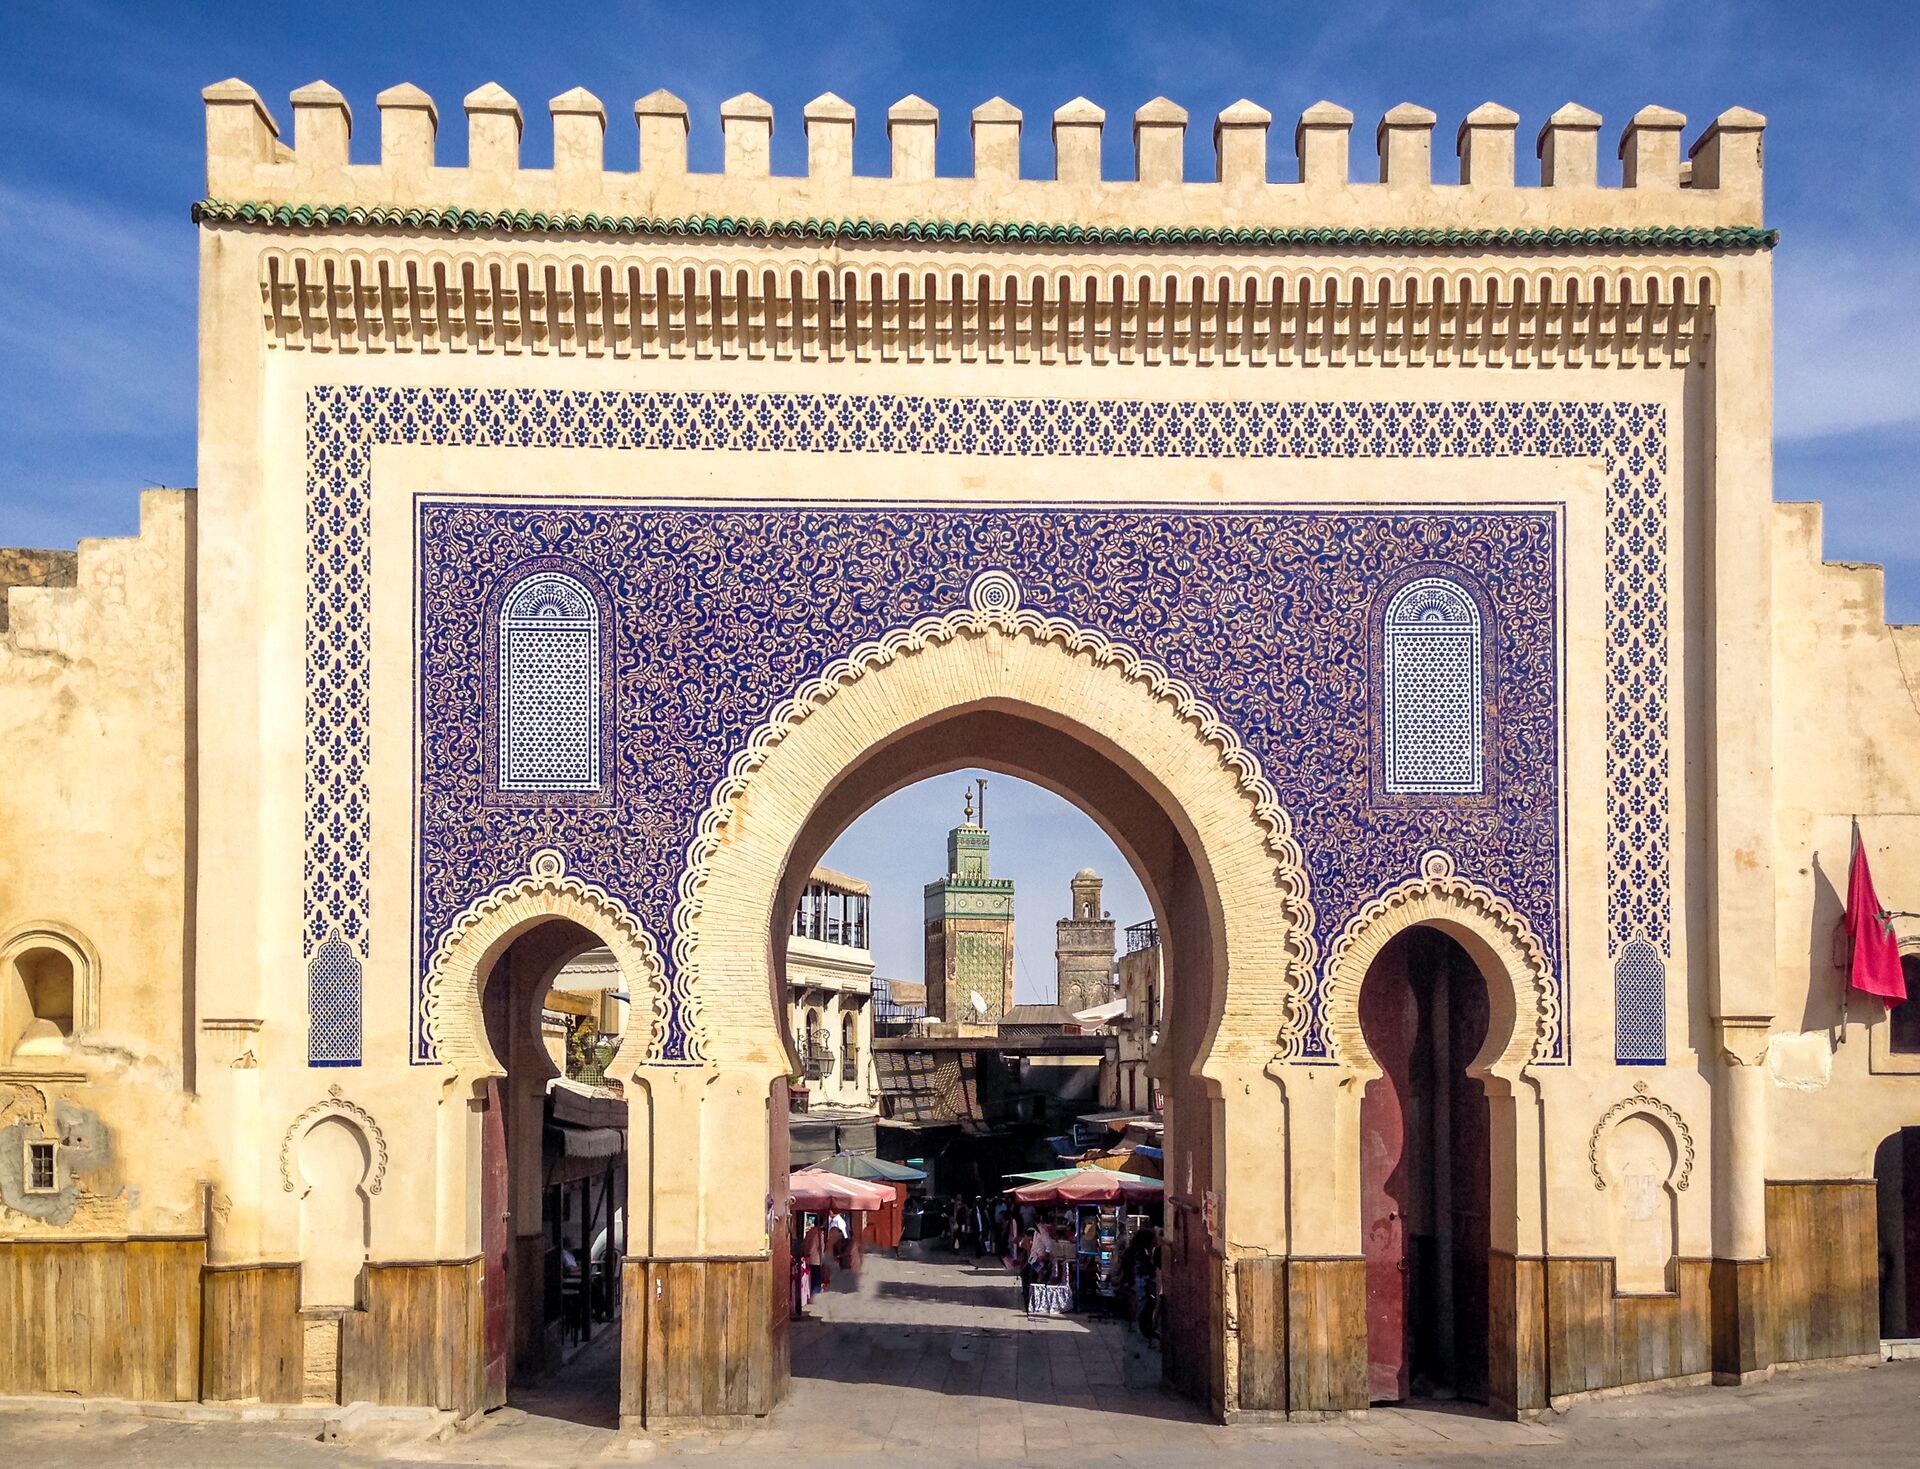 Large, ornate blue and while gate to the Fes Medina, with three archways showing the old town behind.